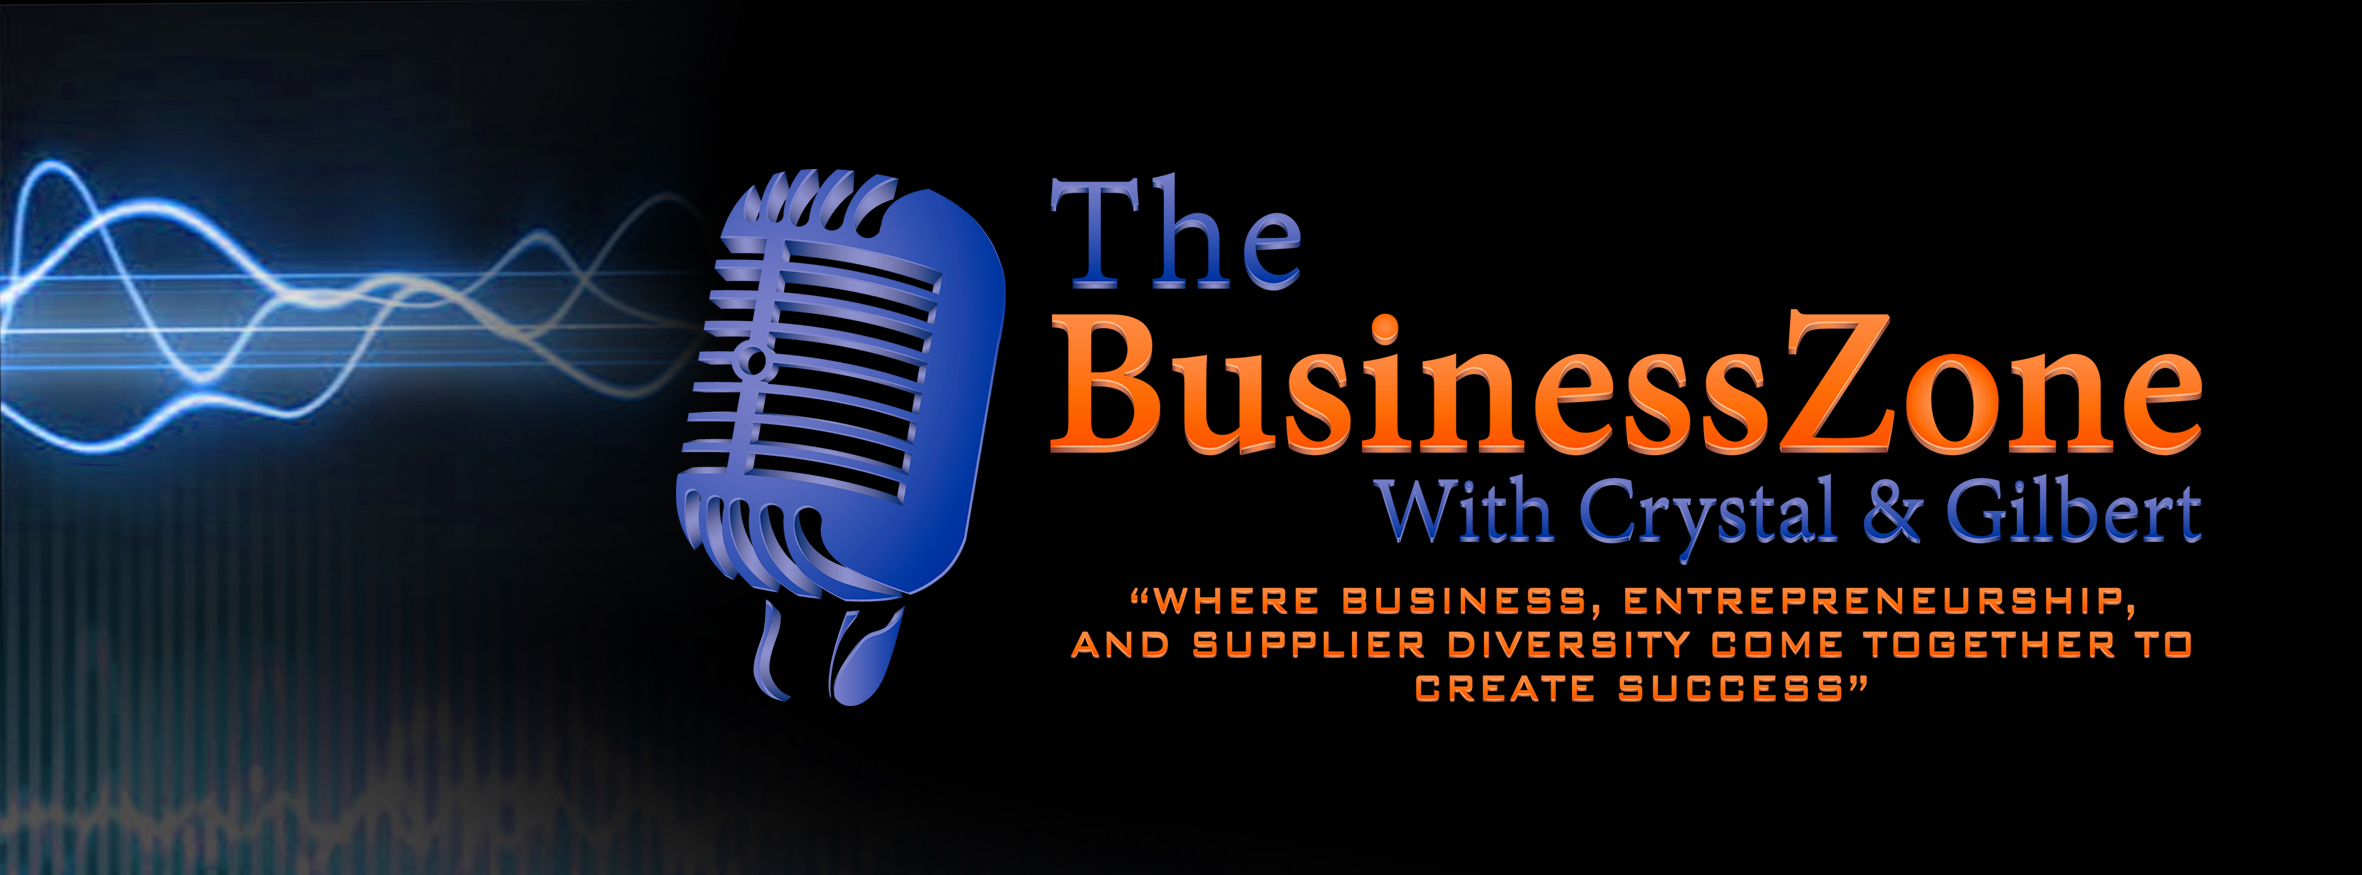 The Business Zone w/ Crystal & Gilbert GUEST: VICTOR PARKER 10-13-17